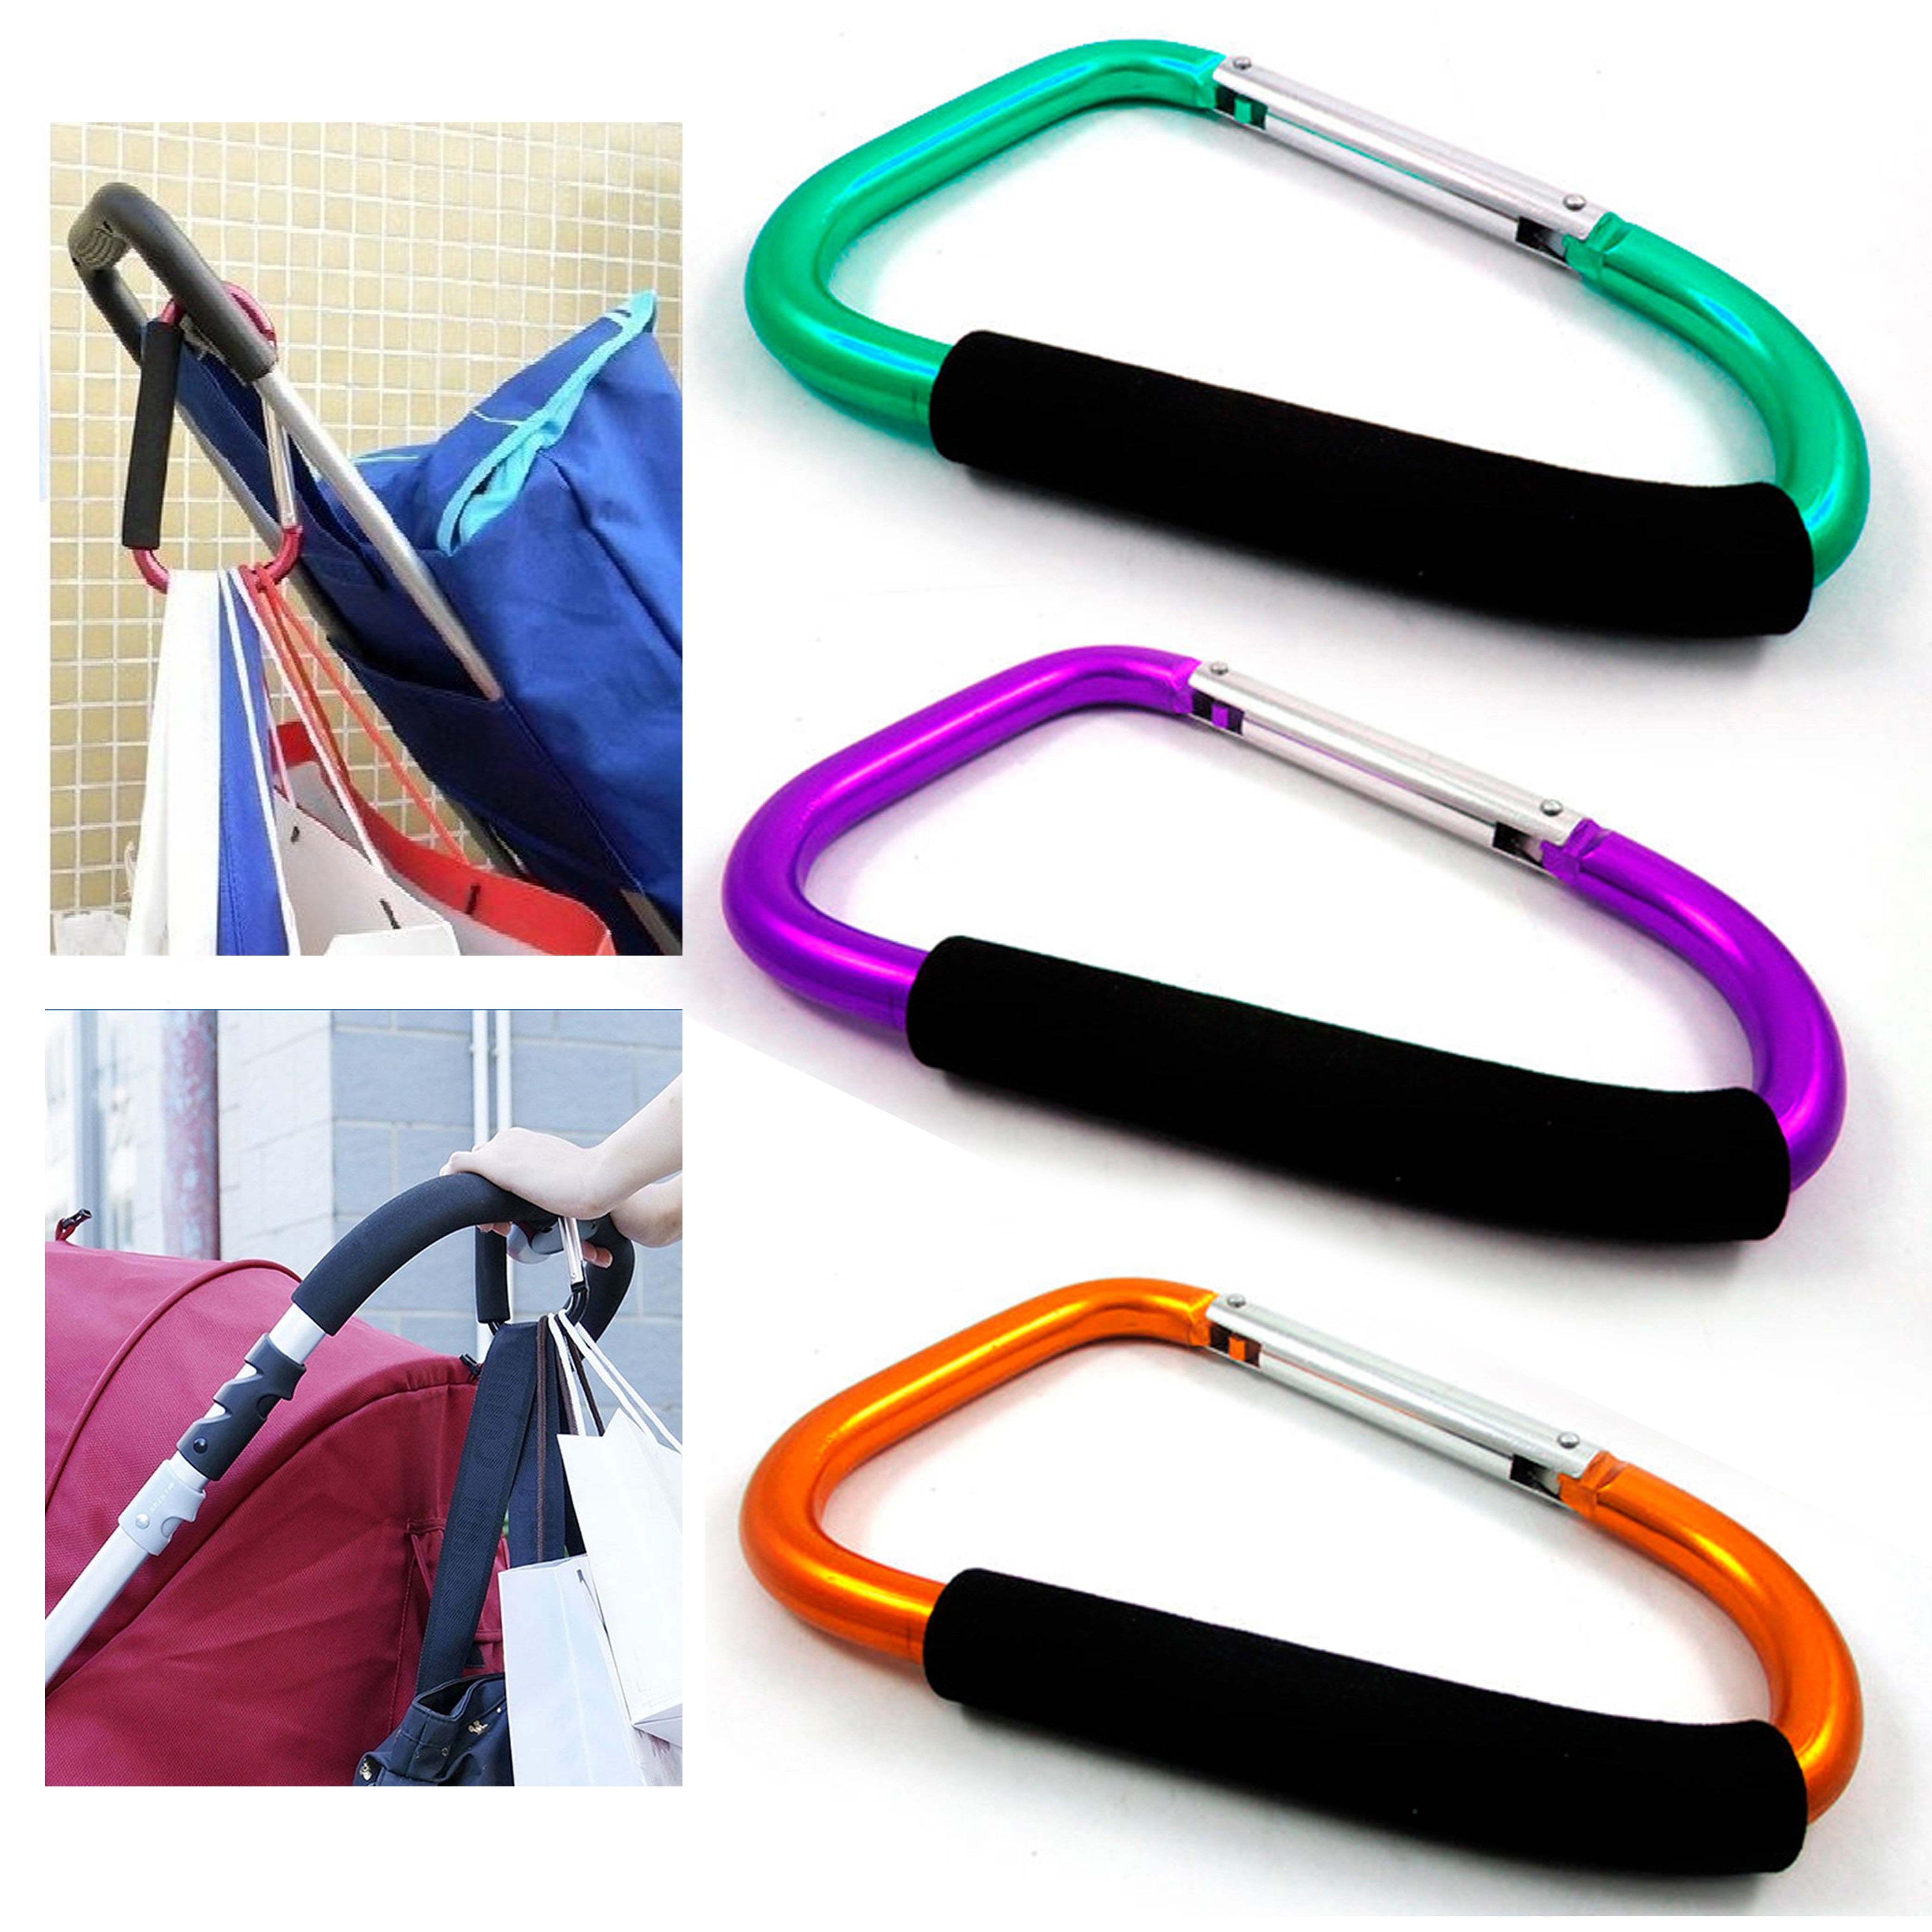 ghfcffdghrdshdfh Rubble Water Bottle Buckle Carabiner Hook Holder Clip Traveling Buckle Clamp